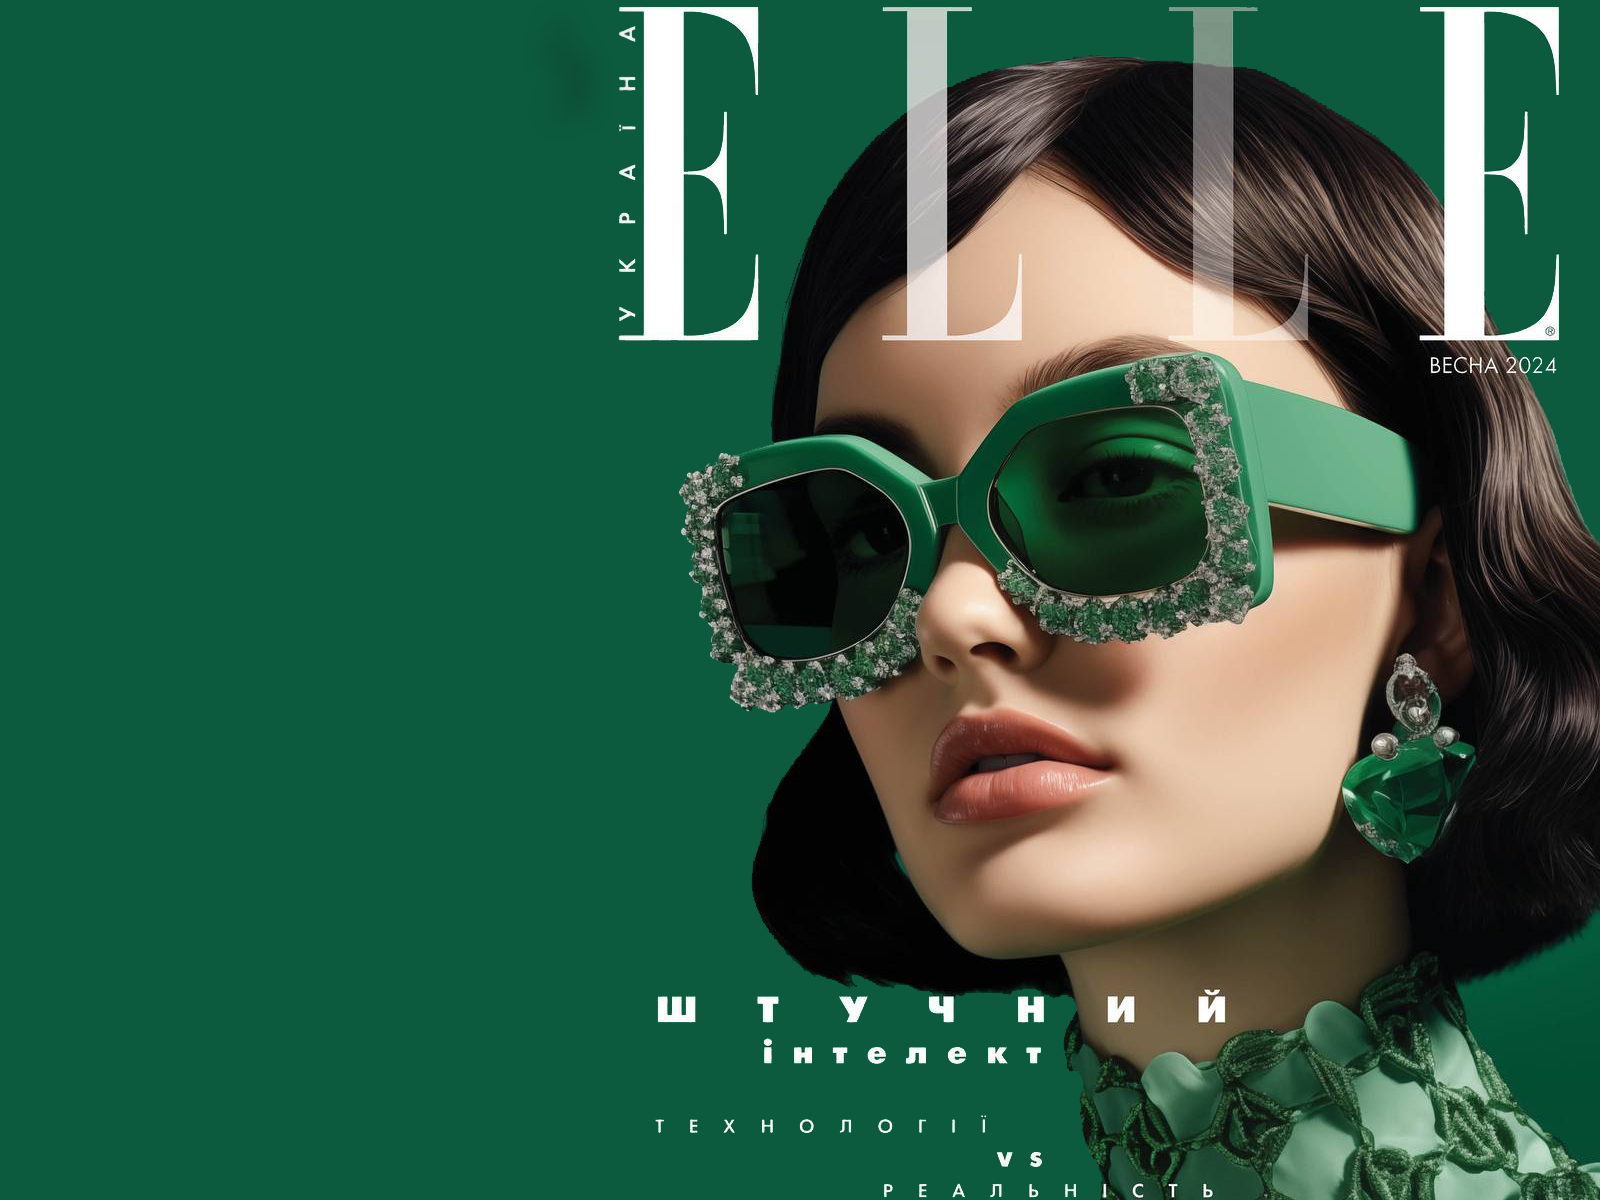 ELLE UKRAINE PRESENTS AN ISSUE DEDICATED TO ARTIFICIAL INTELLIGENCE